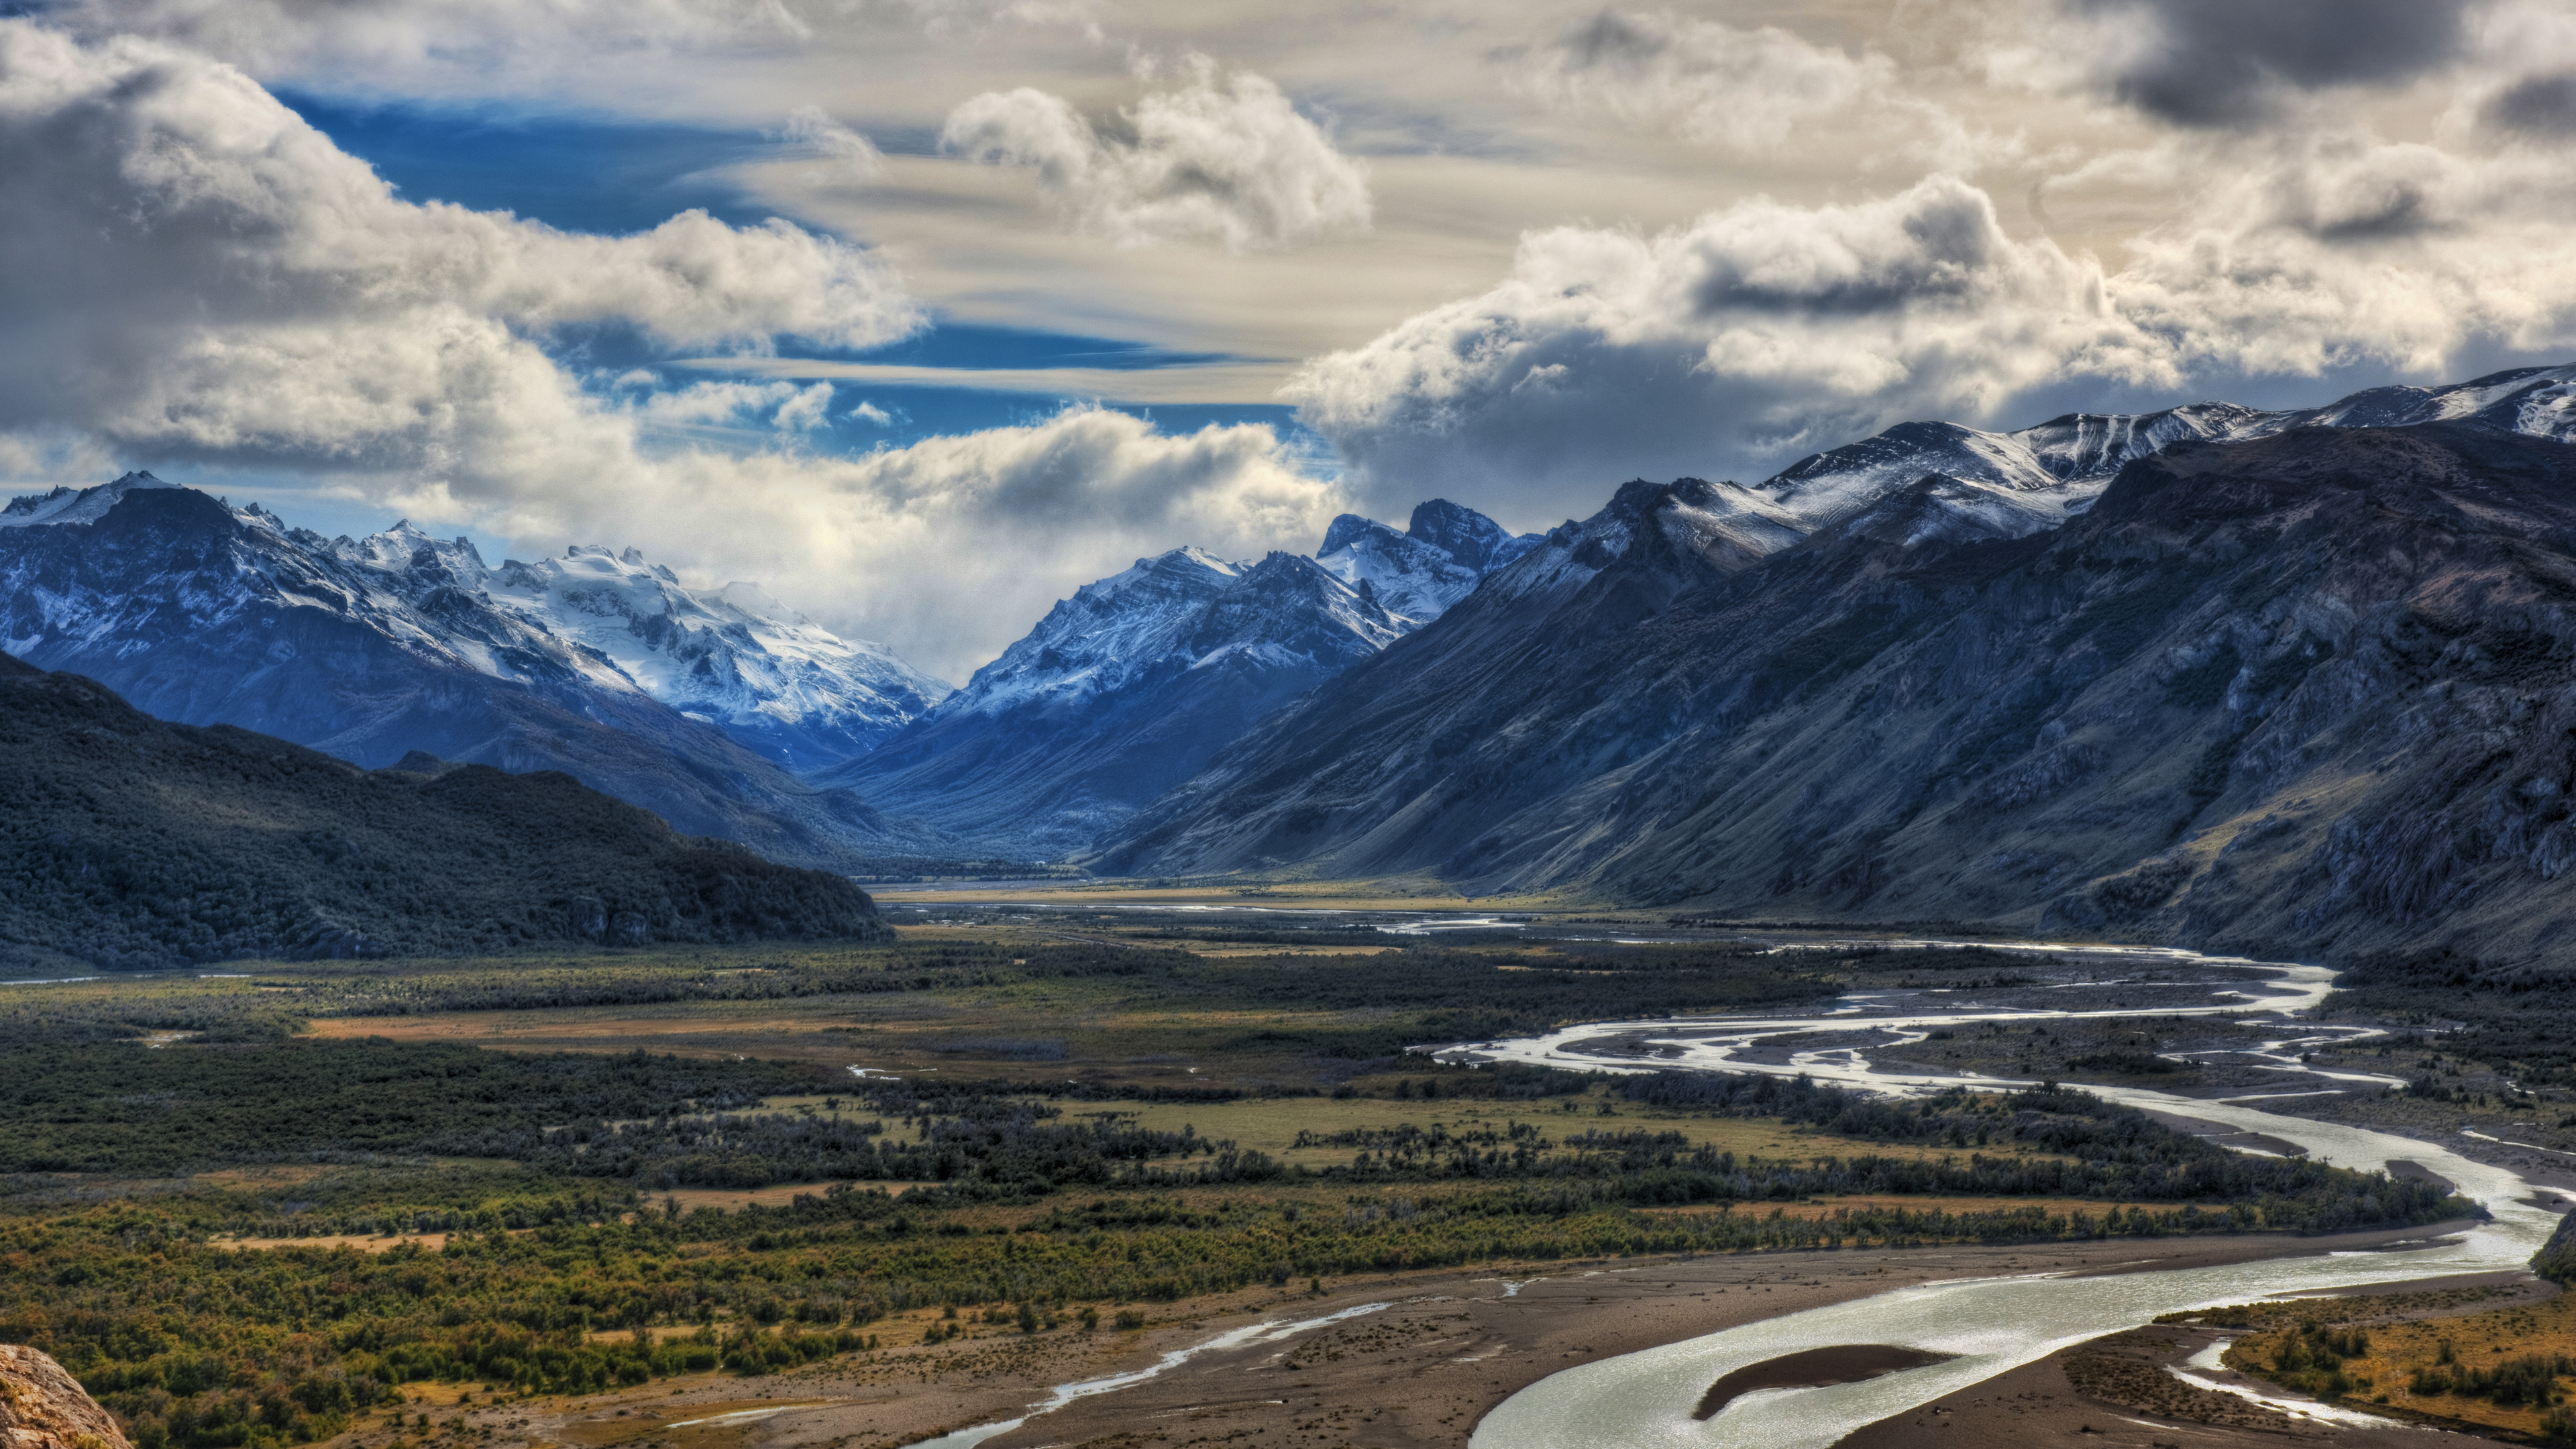 General 3840x2160 4K Trey Ratcliff photography Andes  mountains valley river sky clouds snow plants